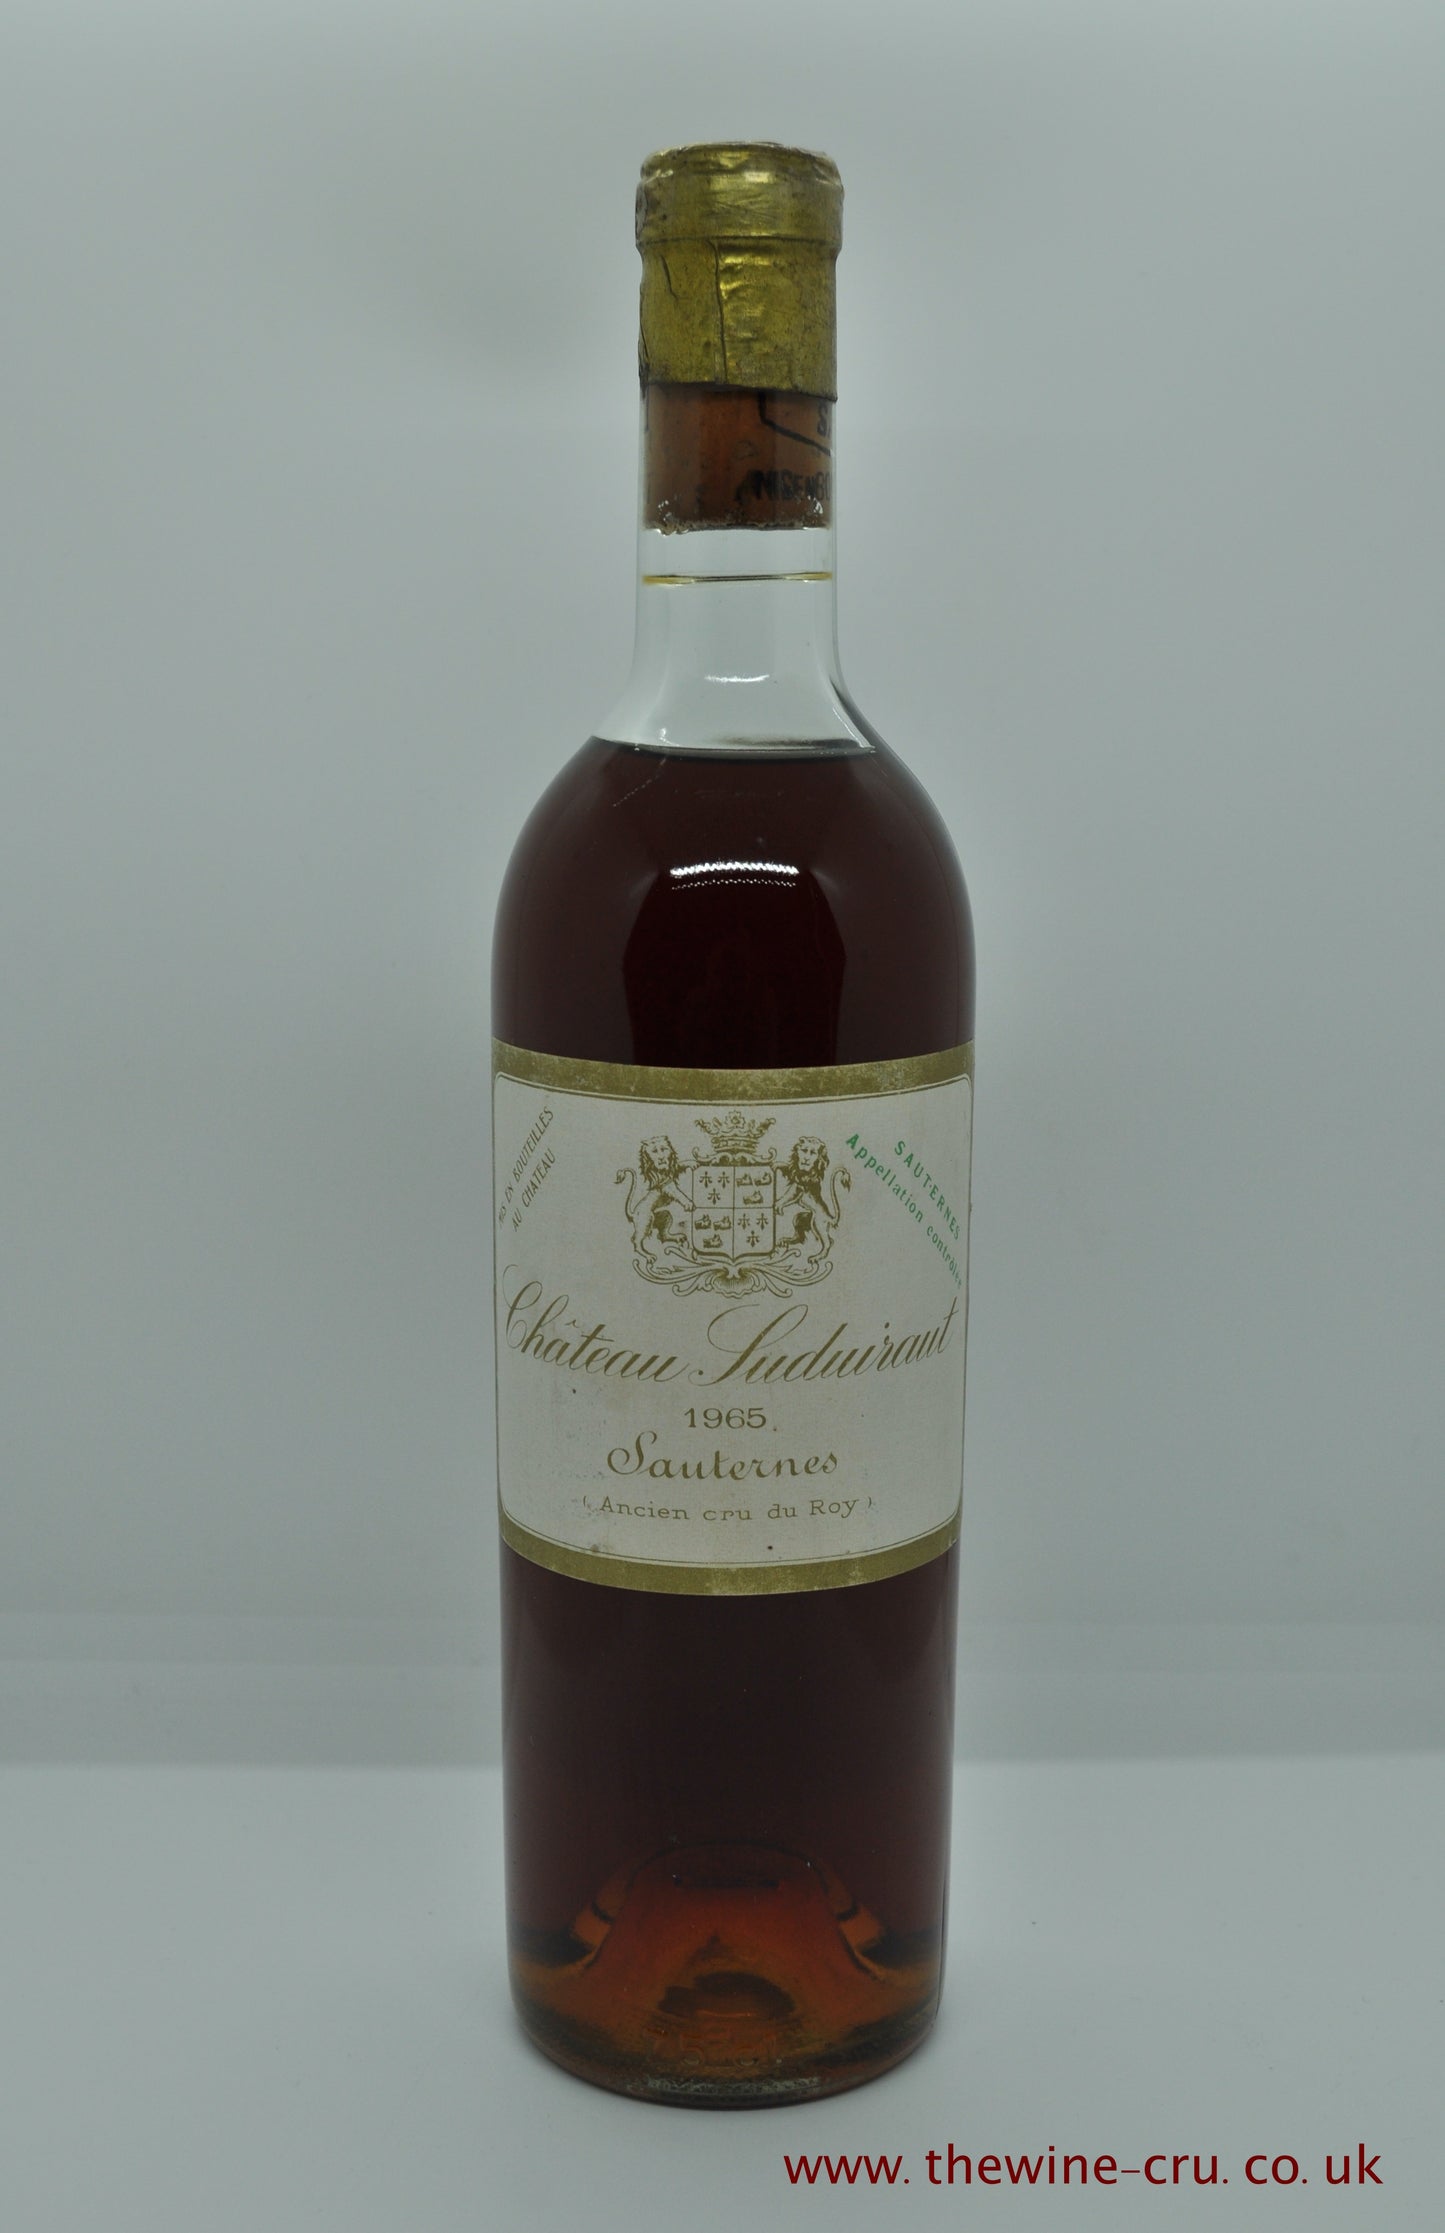 1965 vintage white wine. Chateau Suduiraut 1965. France Bordeaux. Immediate delivery. Free local delivery.